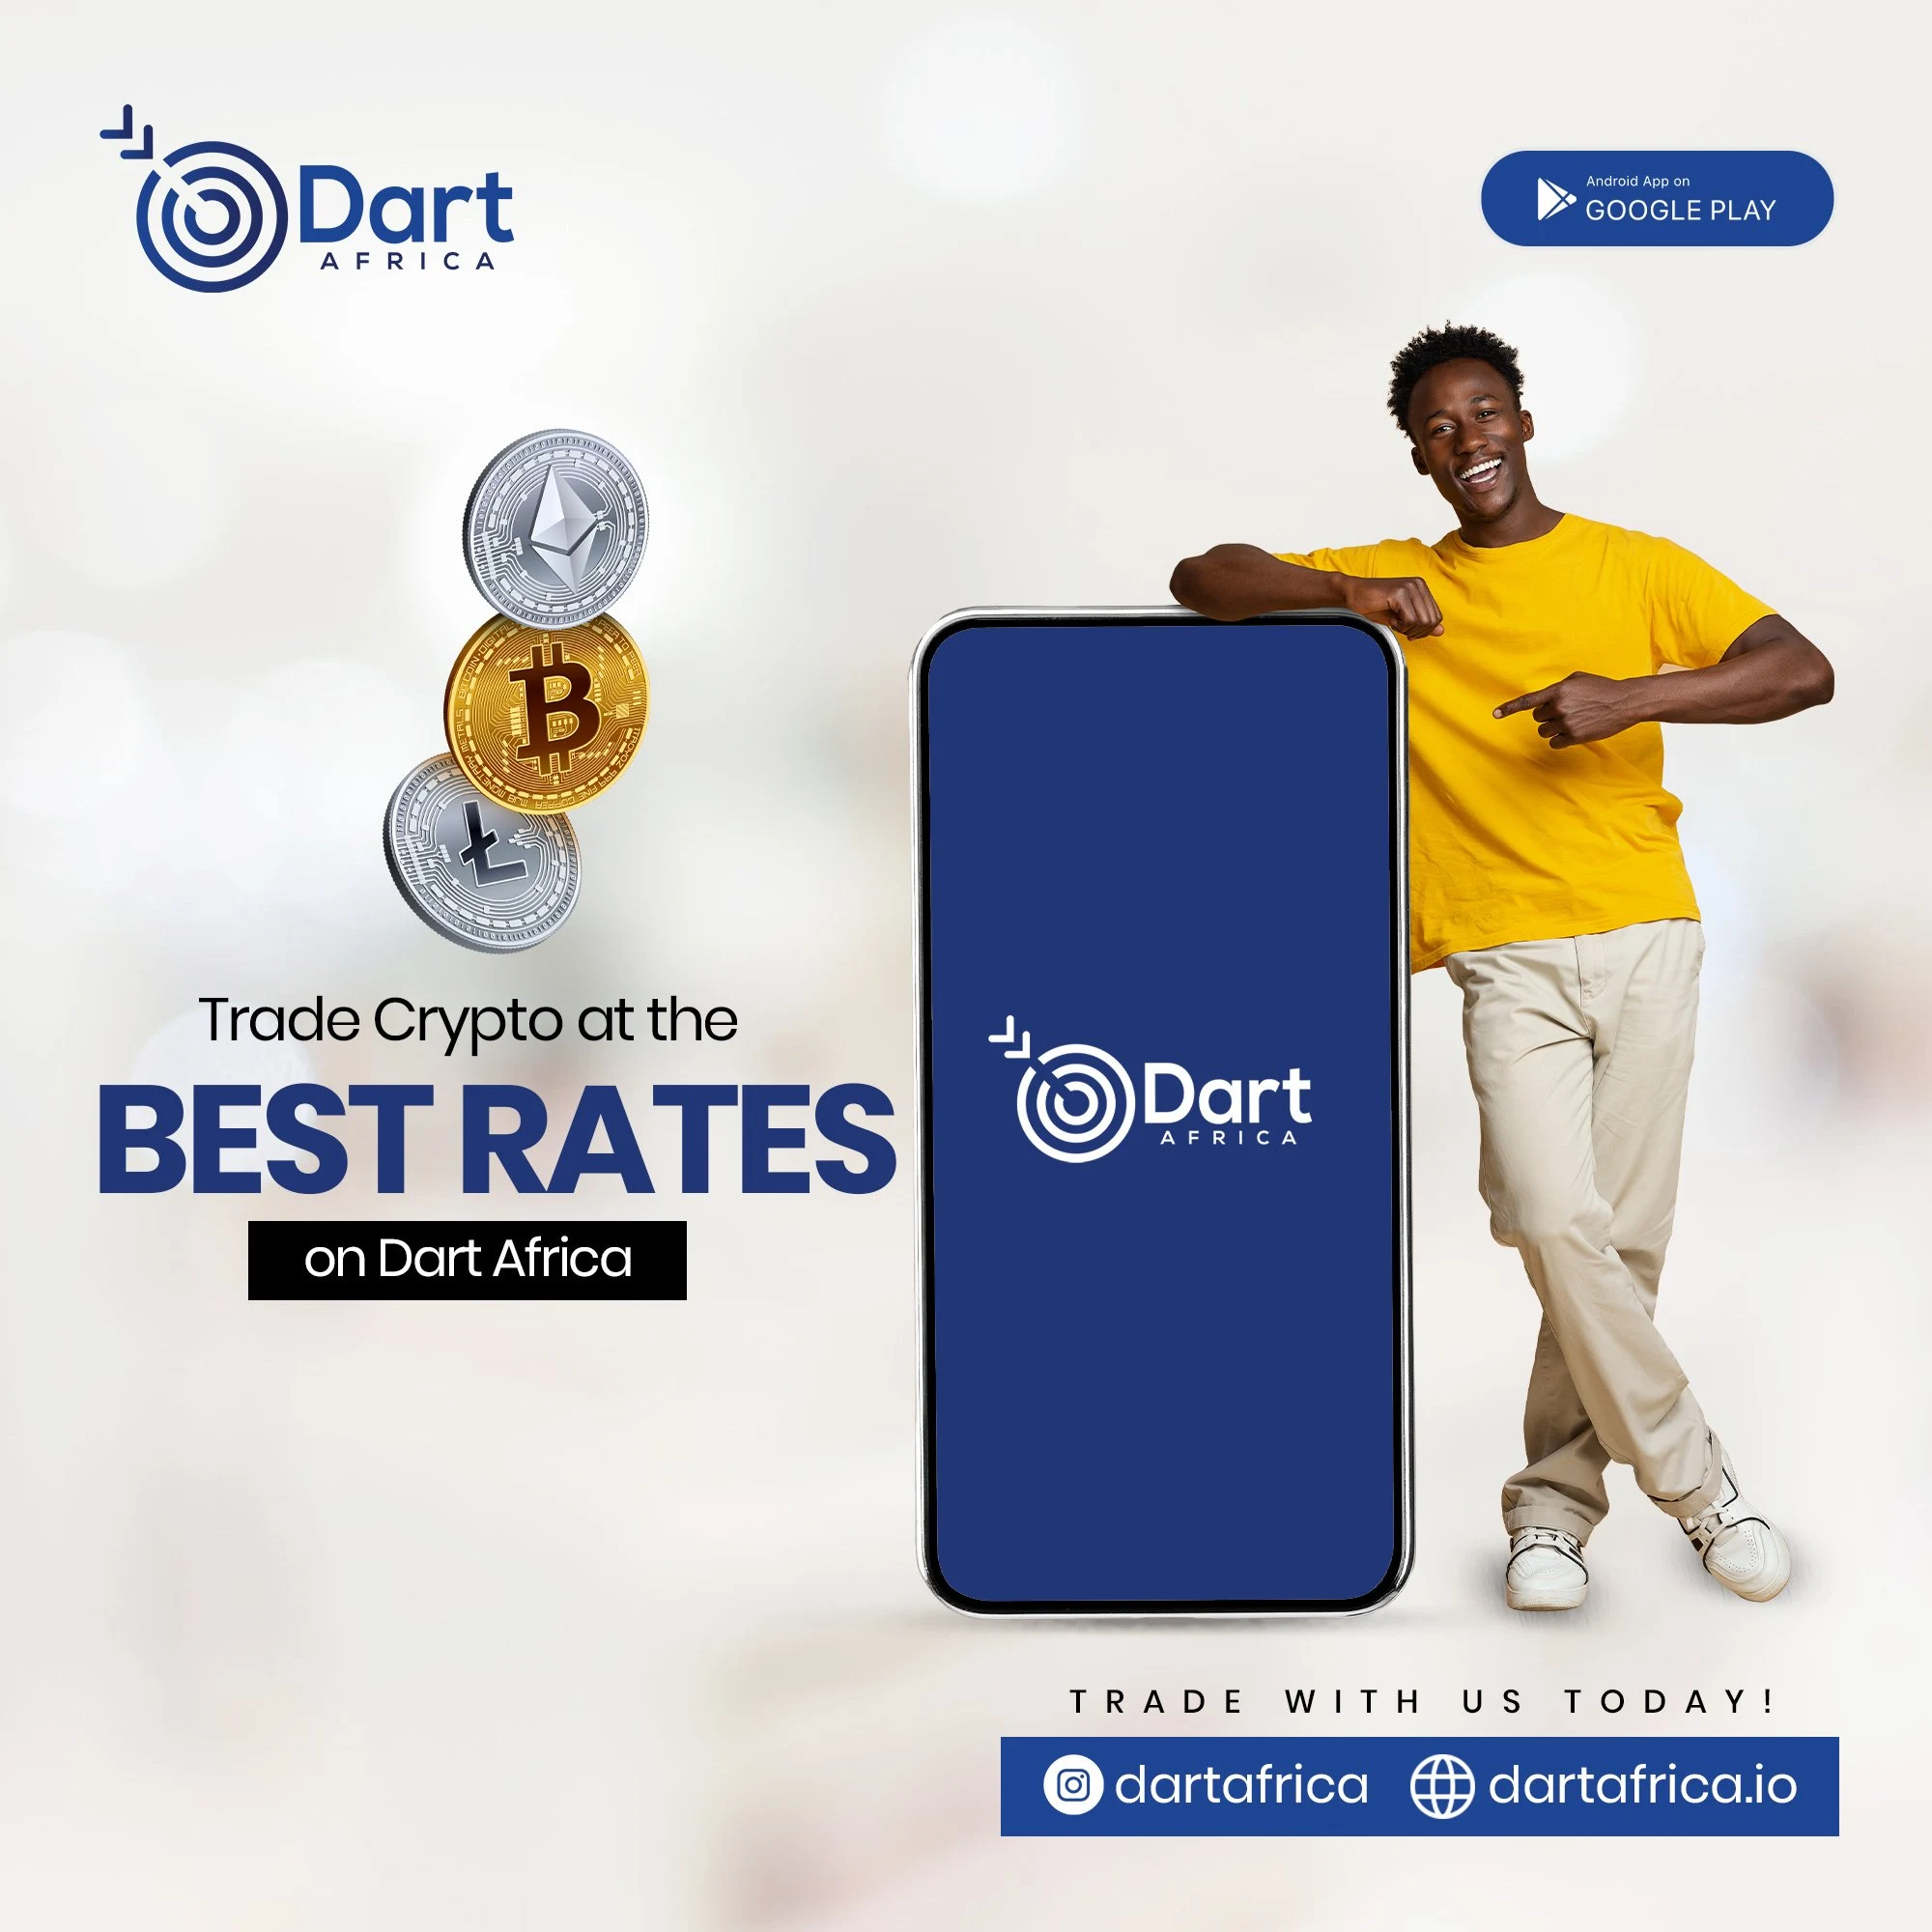 DART AFRICA: A PLATFORM THAT ALLOWS USERS TO TRADE CRYPTOCURRENCY FOR CASH